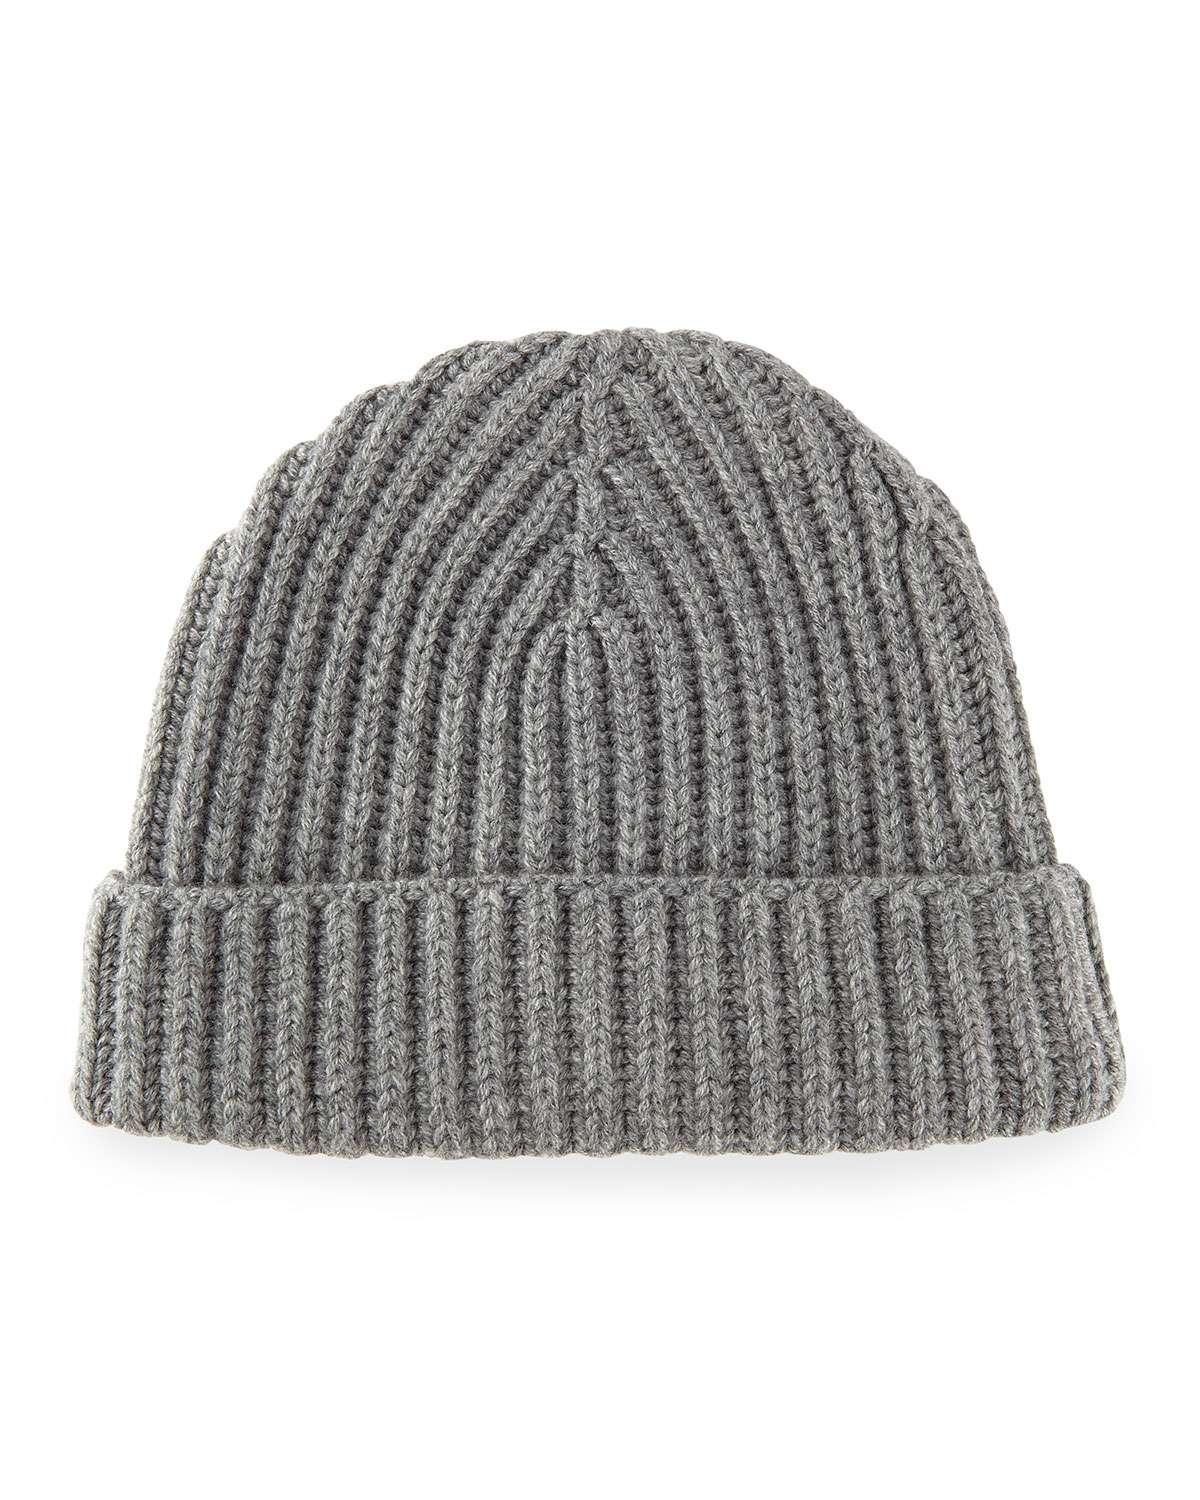 Loro piana Ribbed Cashmere Beanie Hat in Gray for Men | Lyst